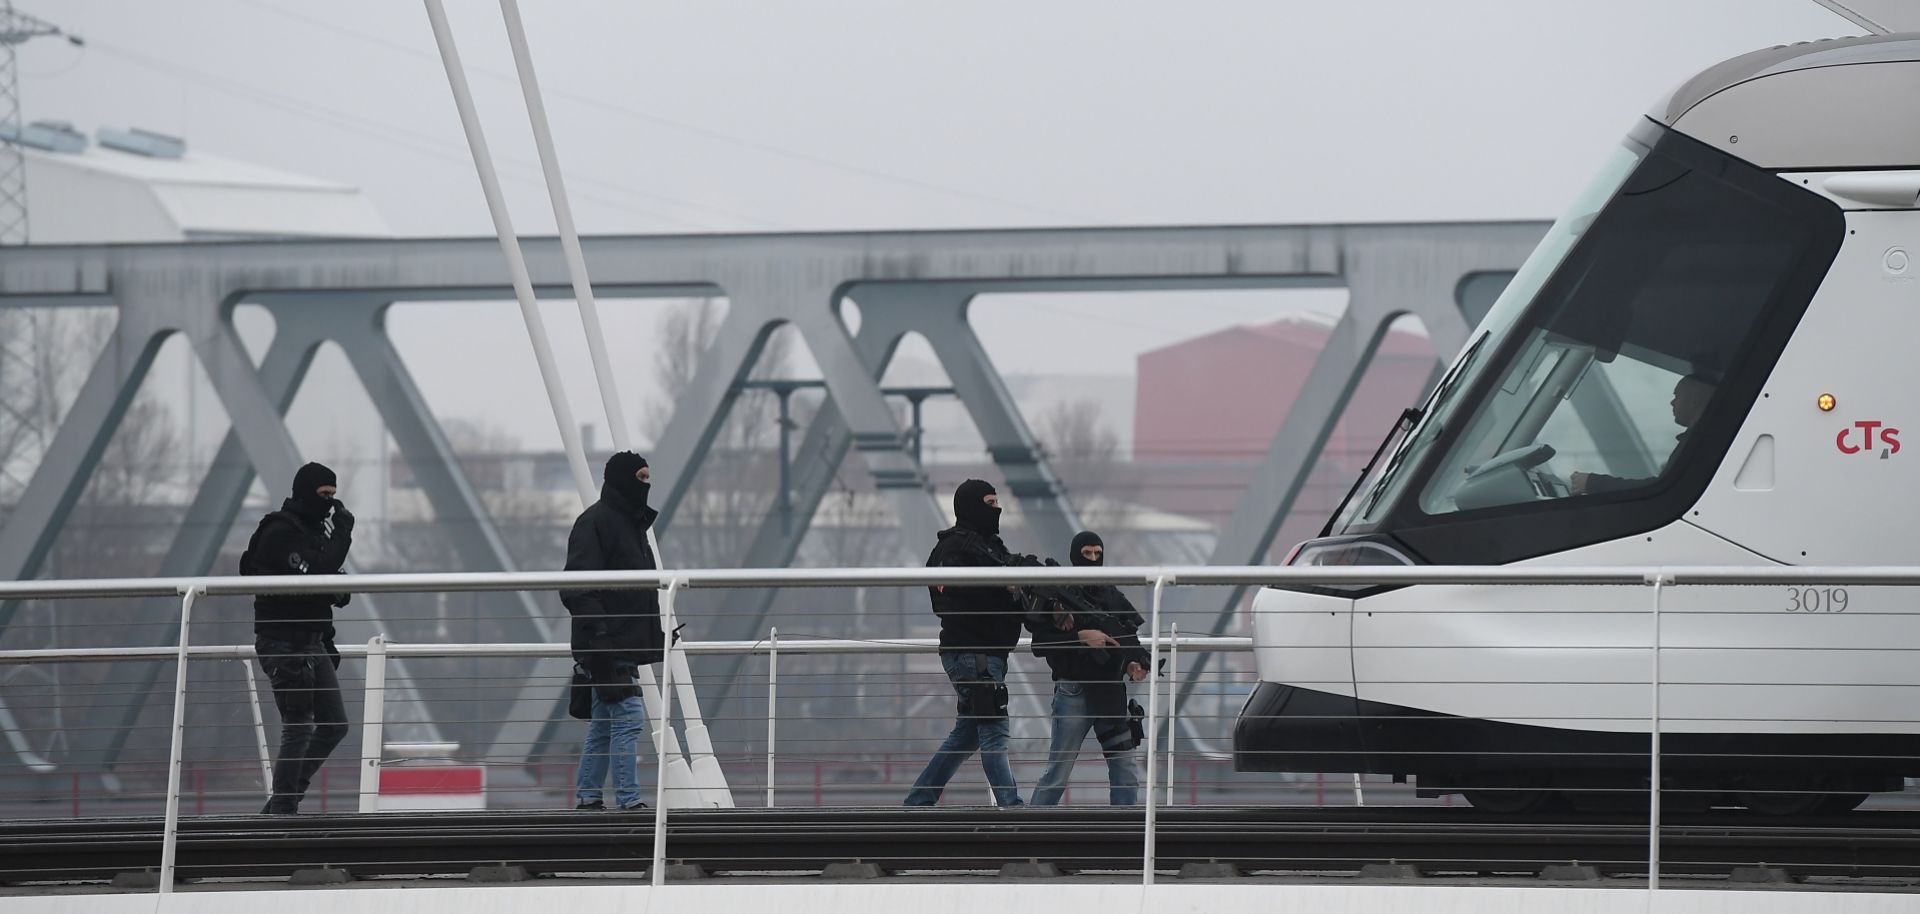 Members of the French police Research and Intervention Brigade prepare to search a tram in Strasbourg on Dec. 12, 2018.